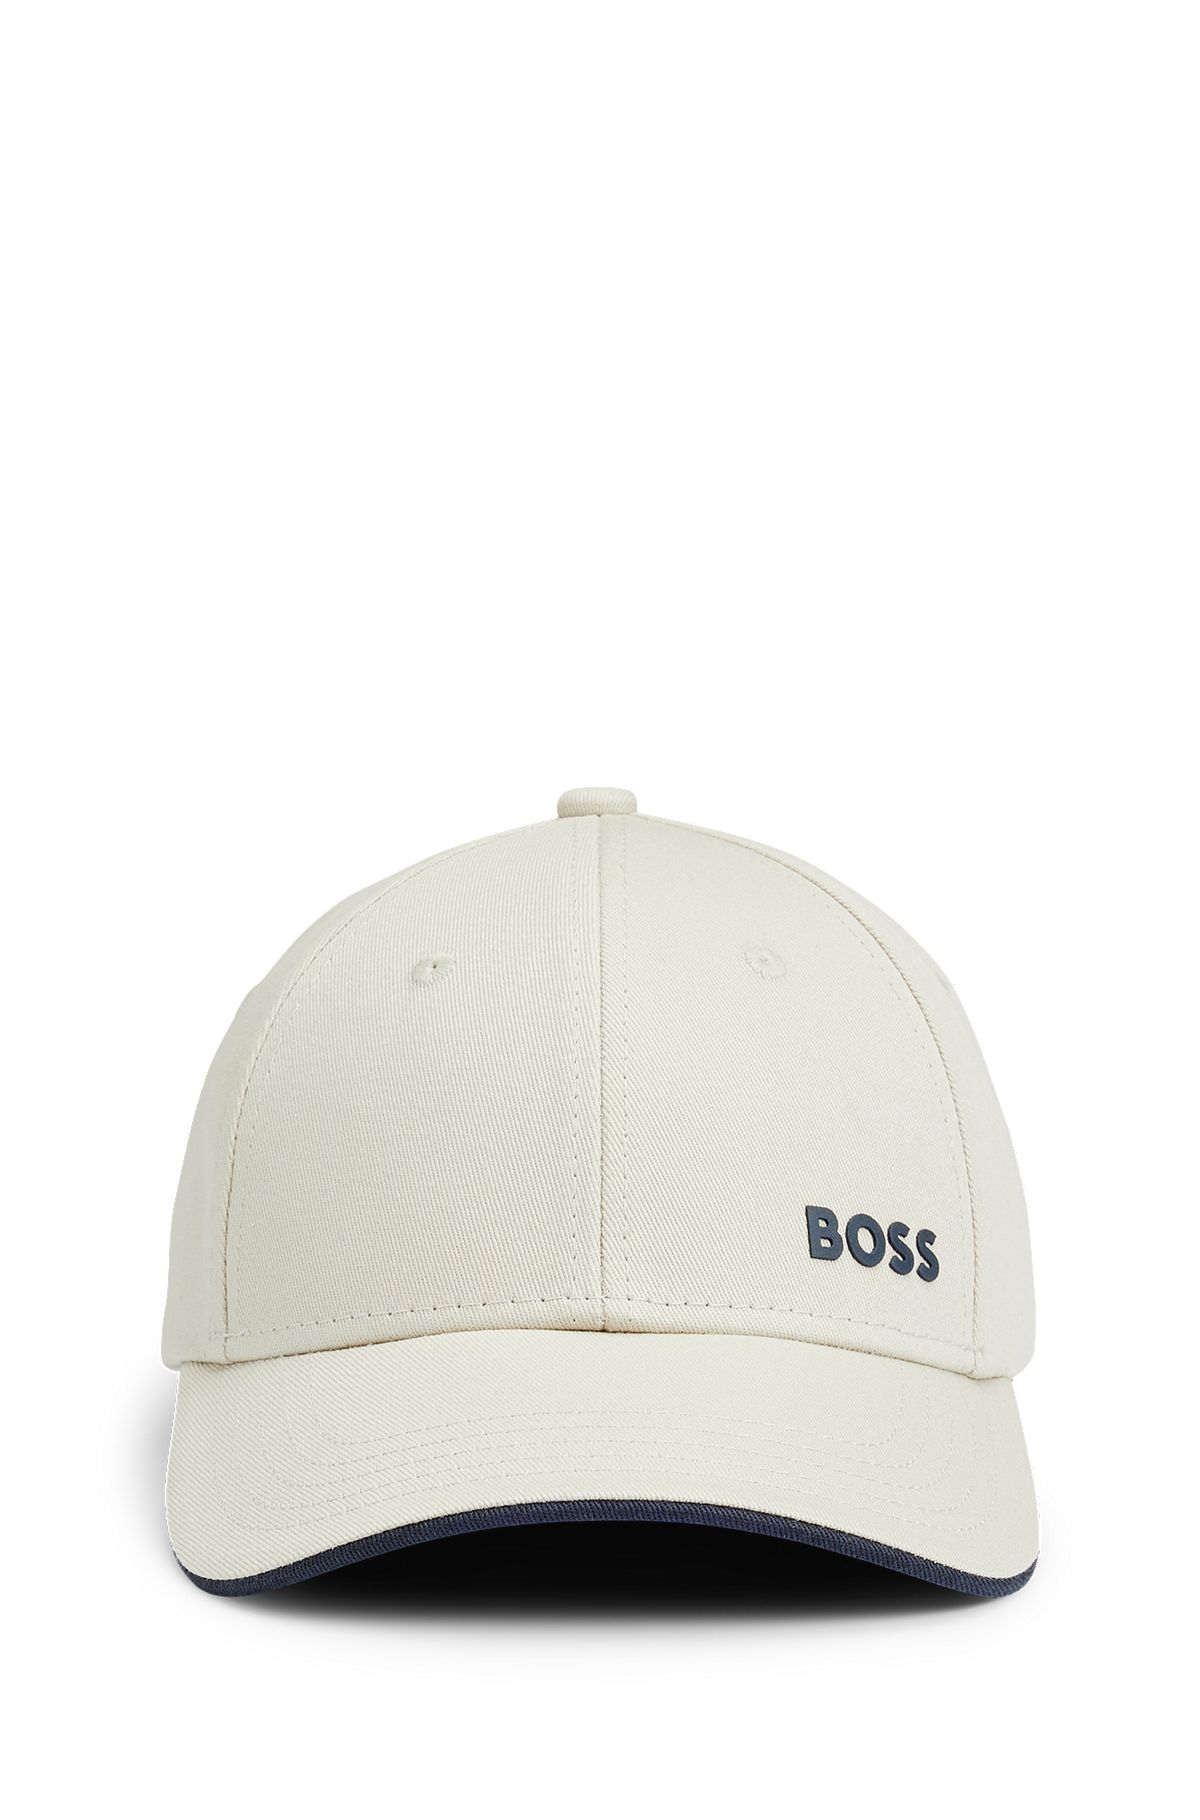 Hats and Gloves in Beige by HUGO BOSS |